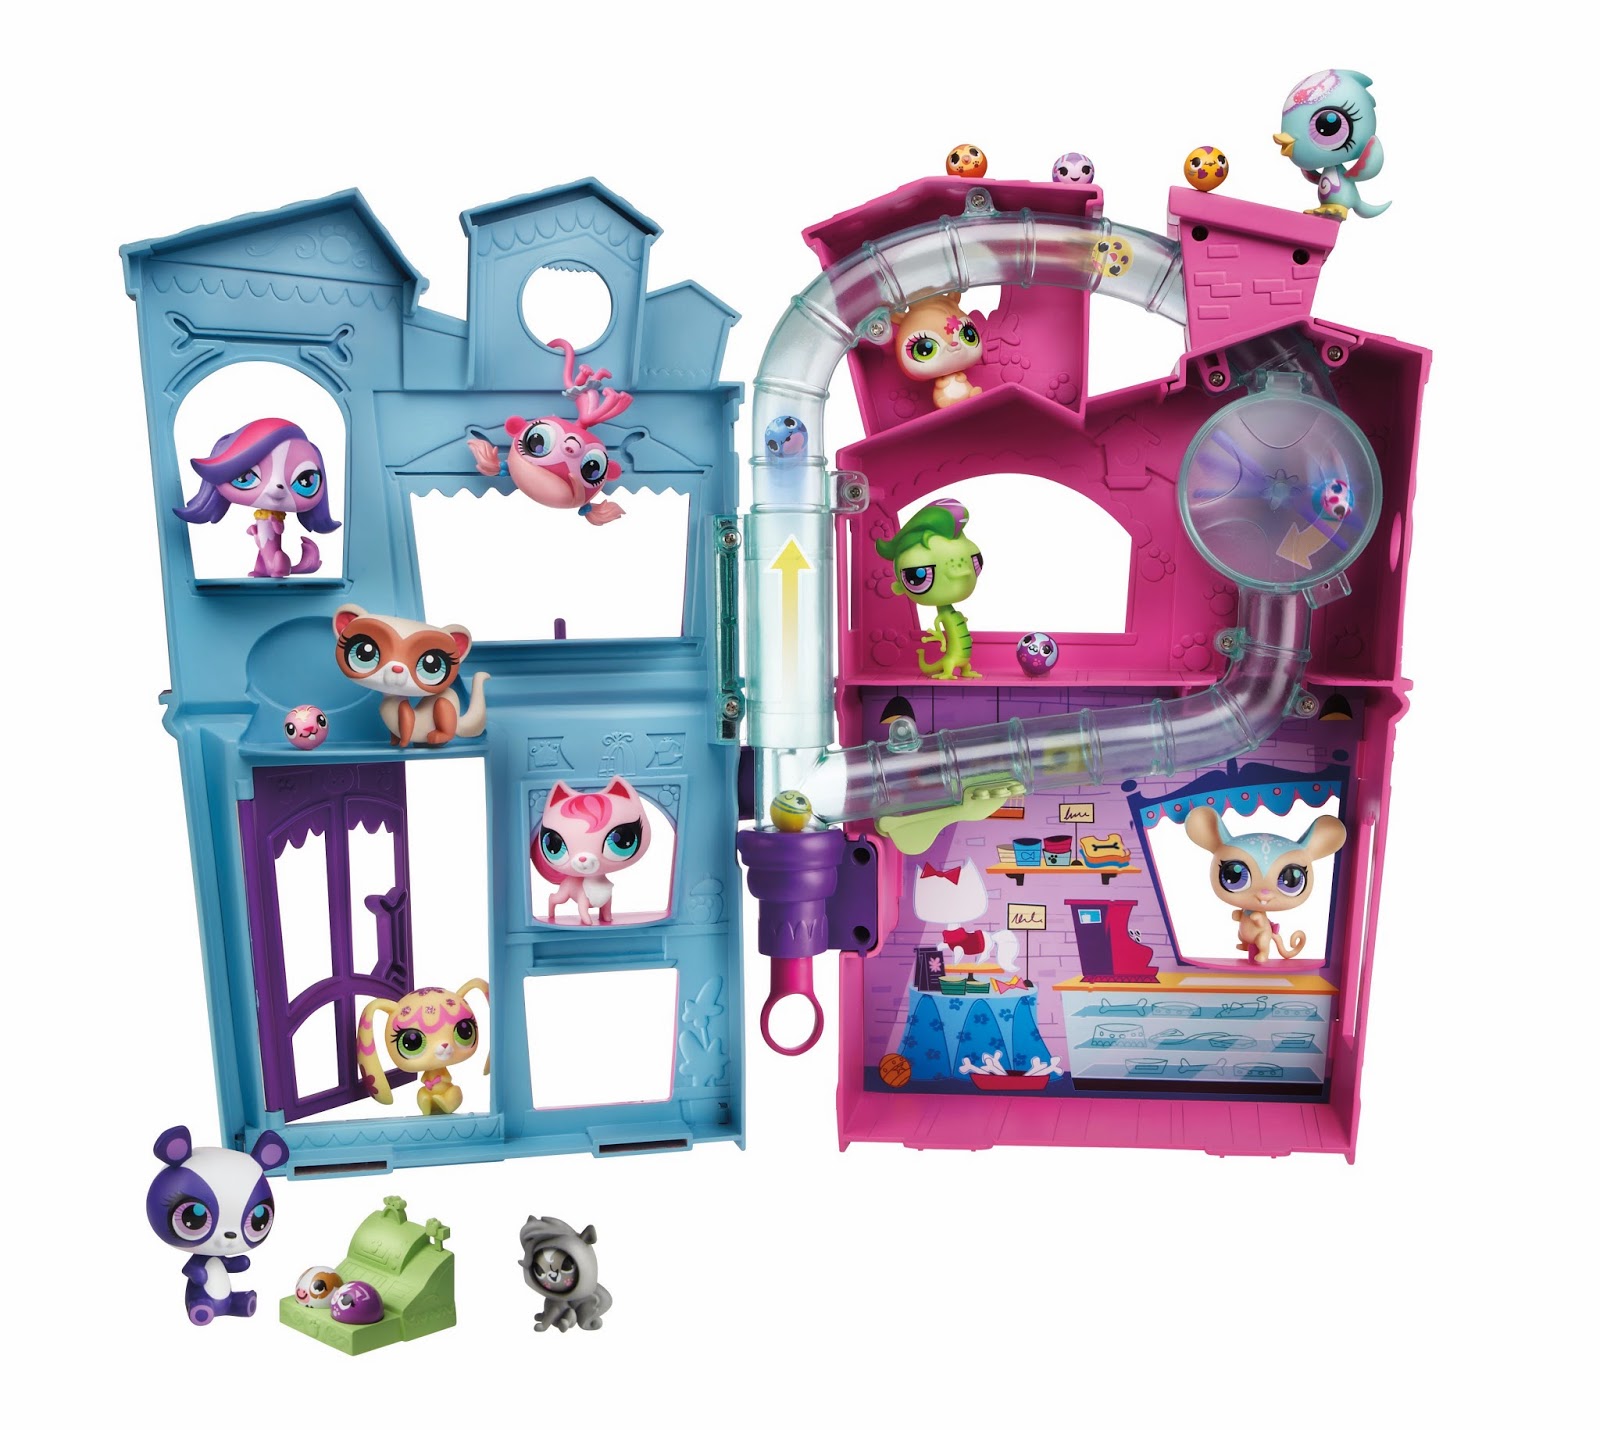 Toy Review: Littlest Pet Shop Playsets!